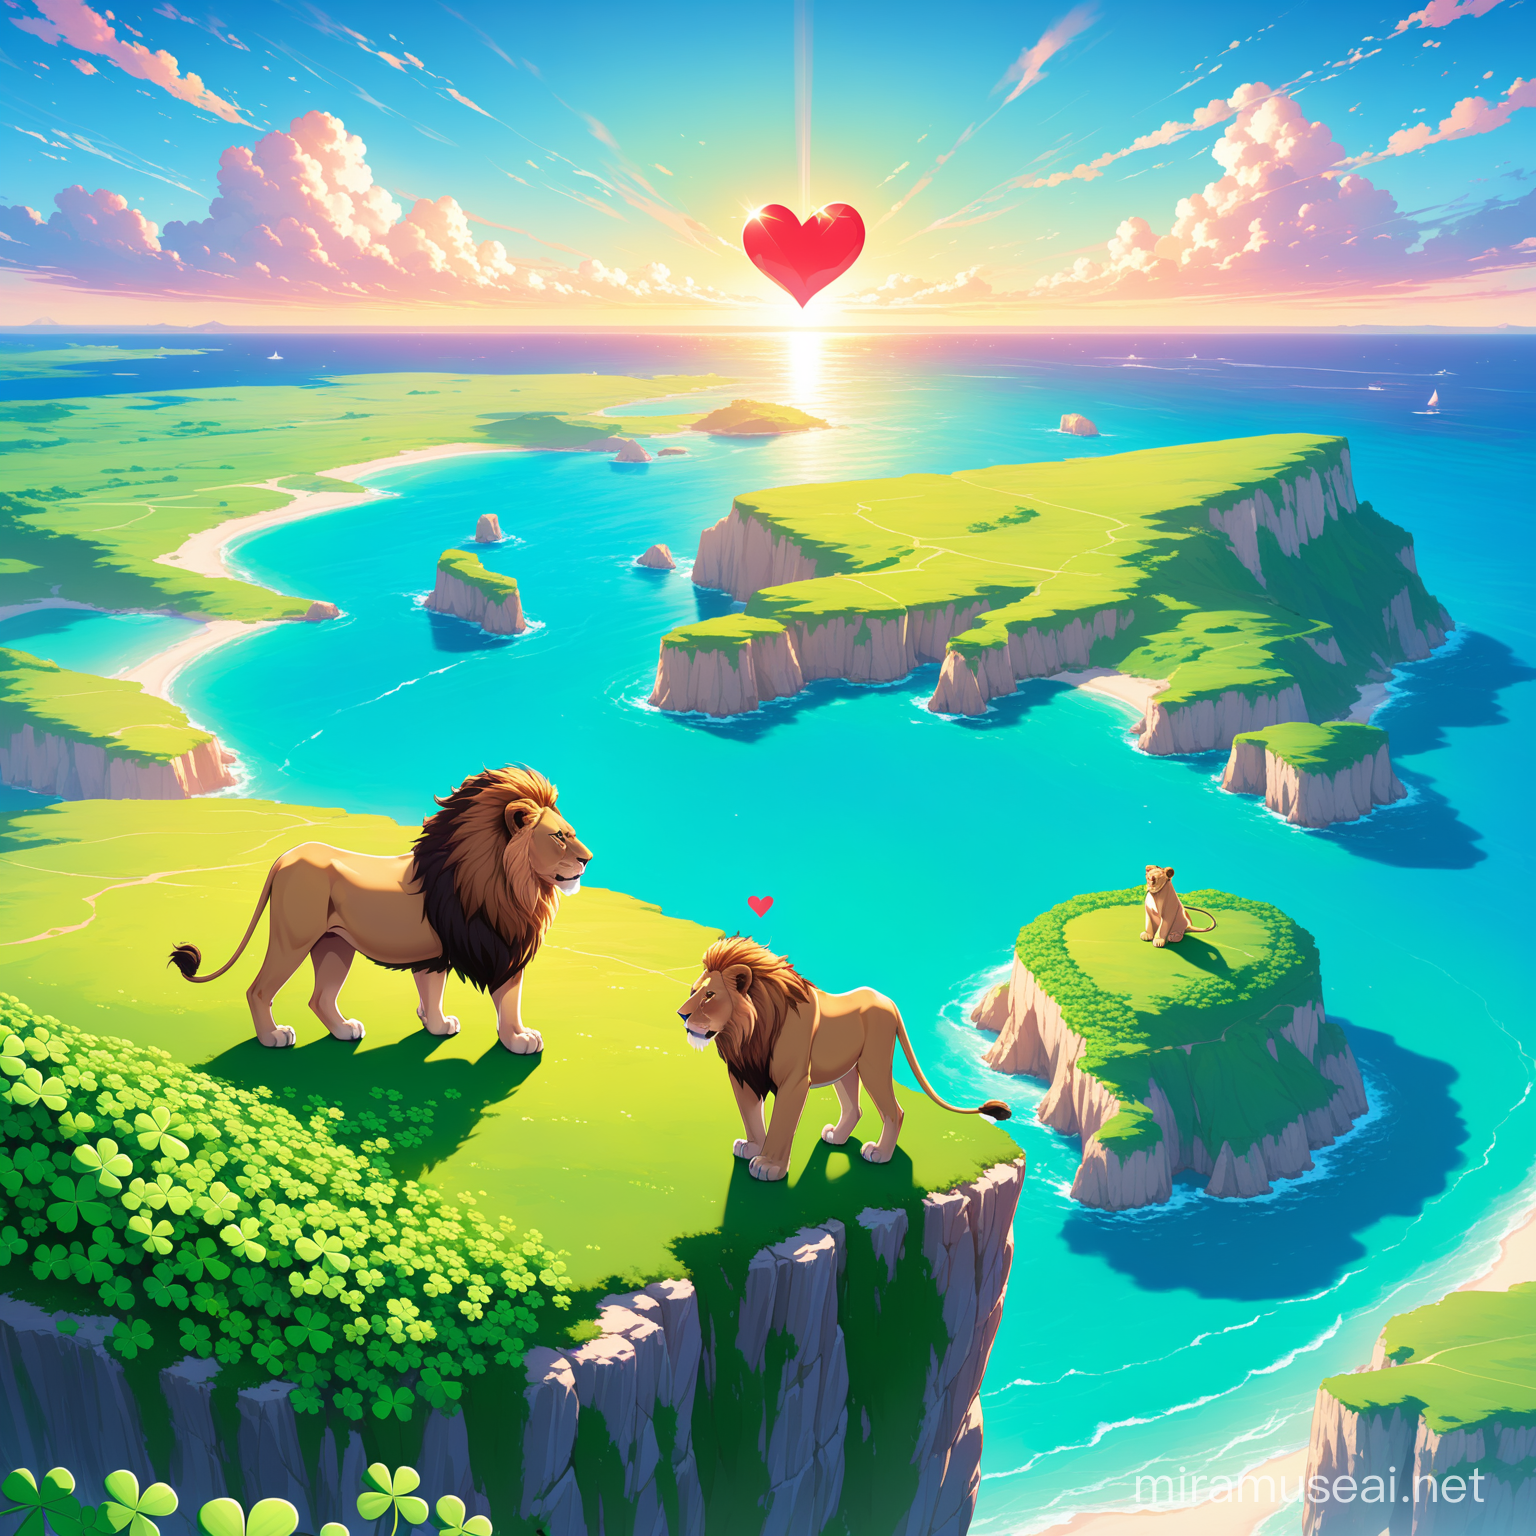 Majestic Lion and Lioness Overlooking Heart Island in Vibrant Landscape